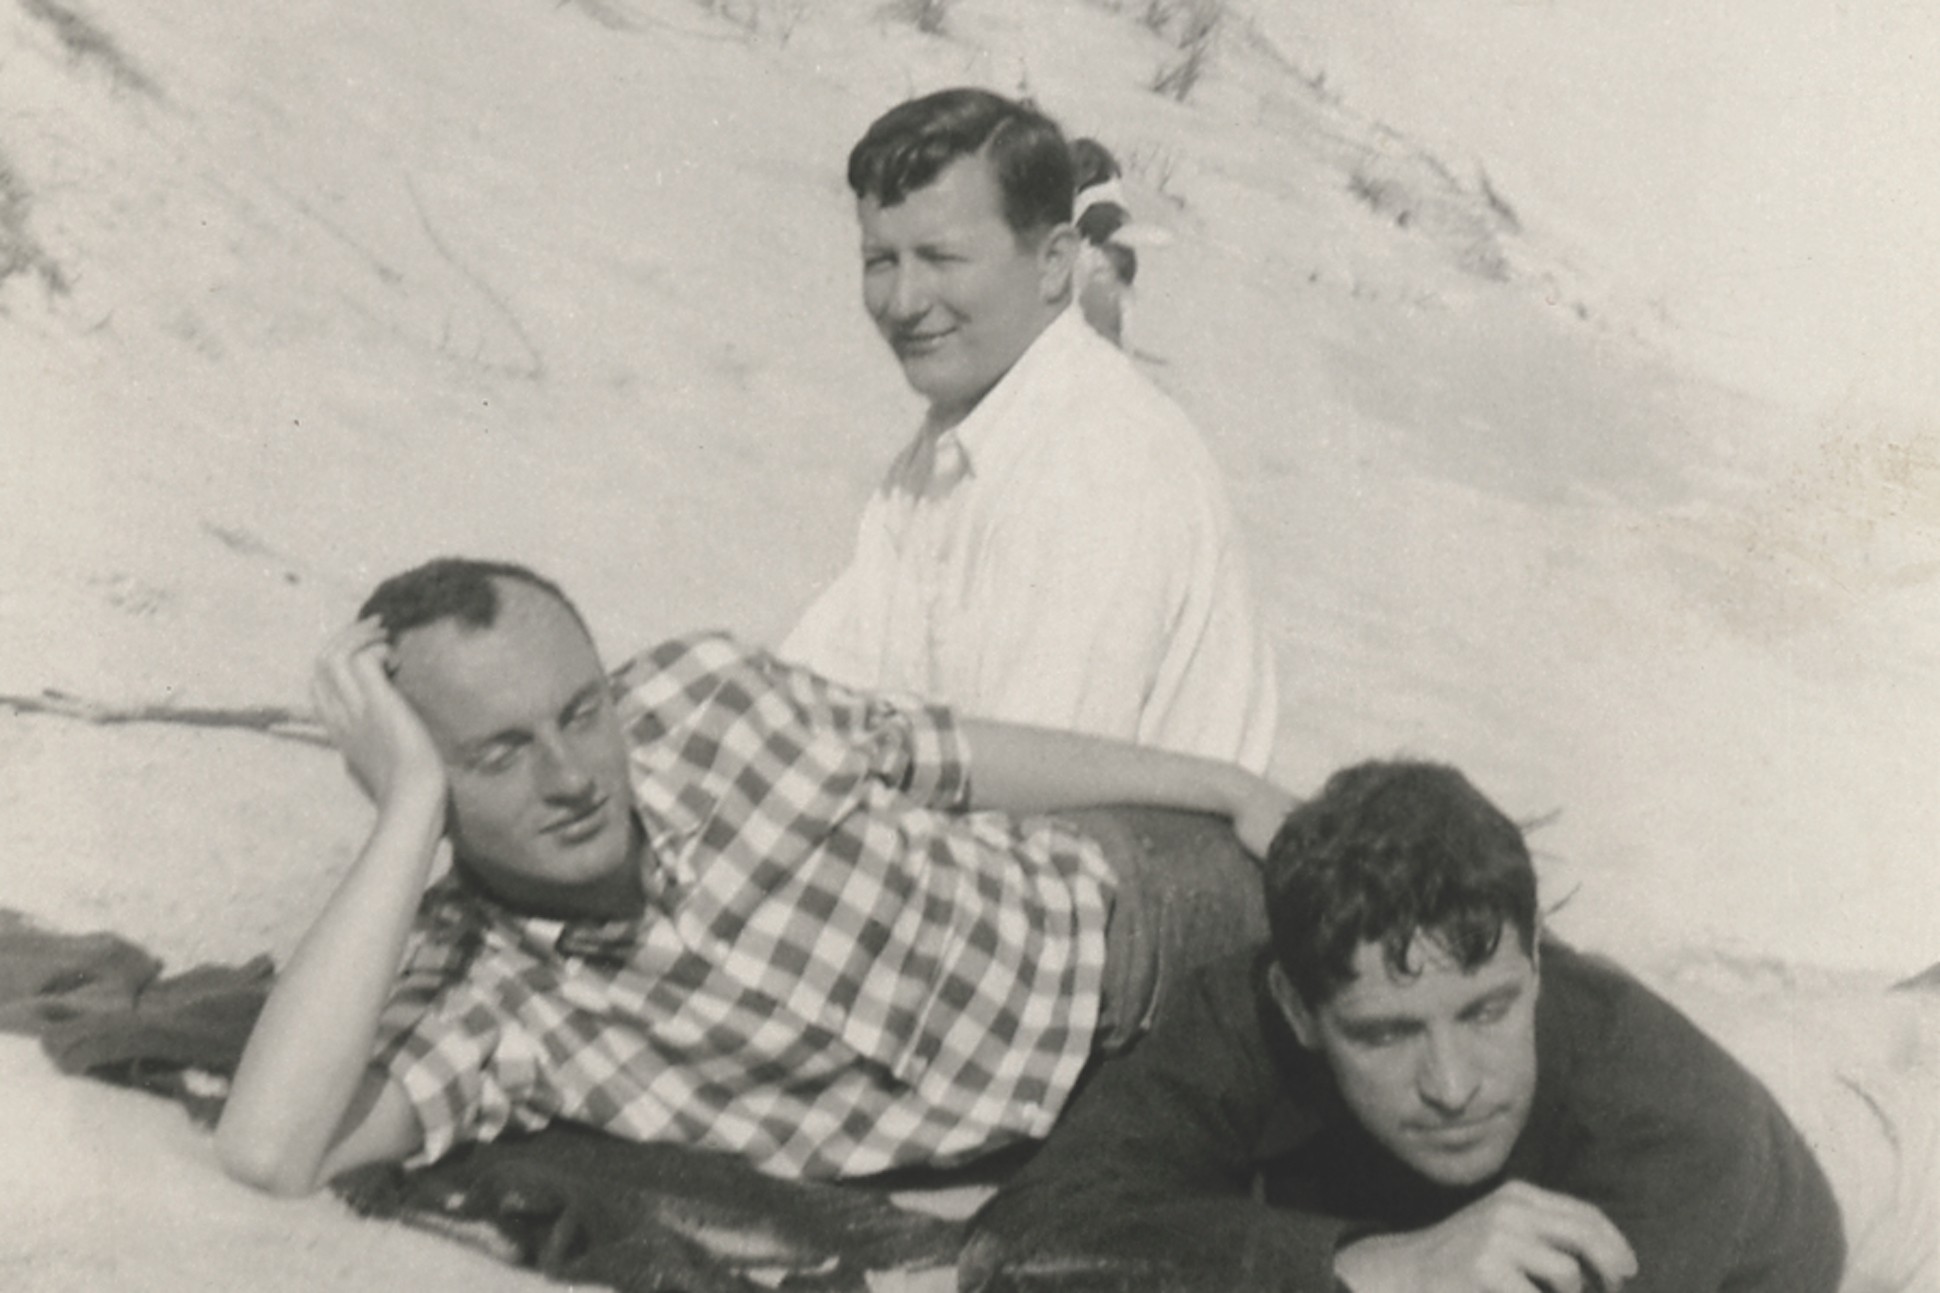 Black and white photo of Frank O'Hara, Hal Fondren, and Fairfield Porter on the beach in 1954.